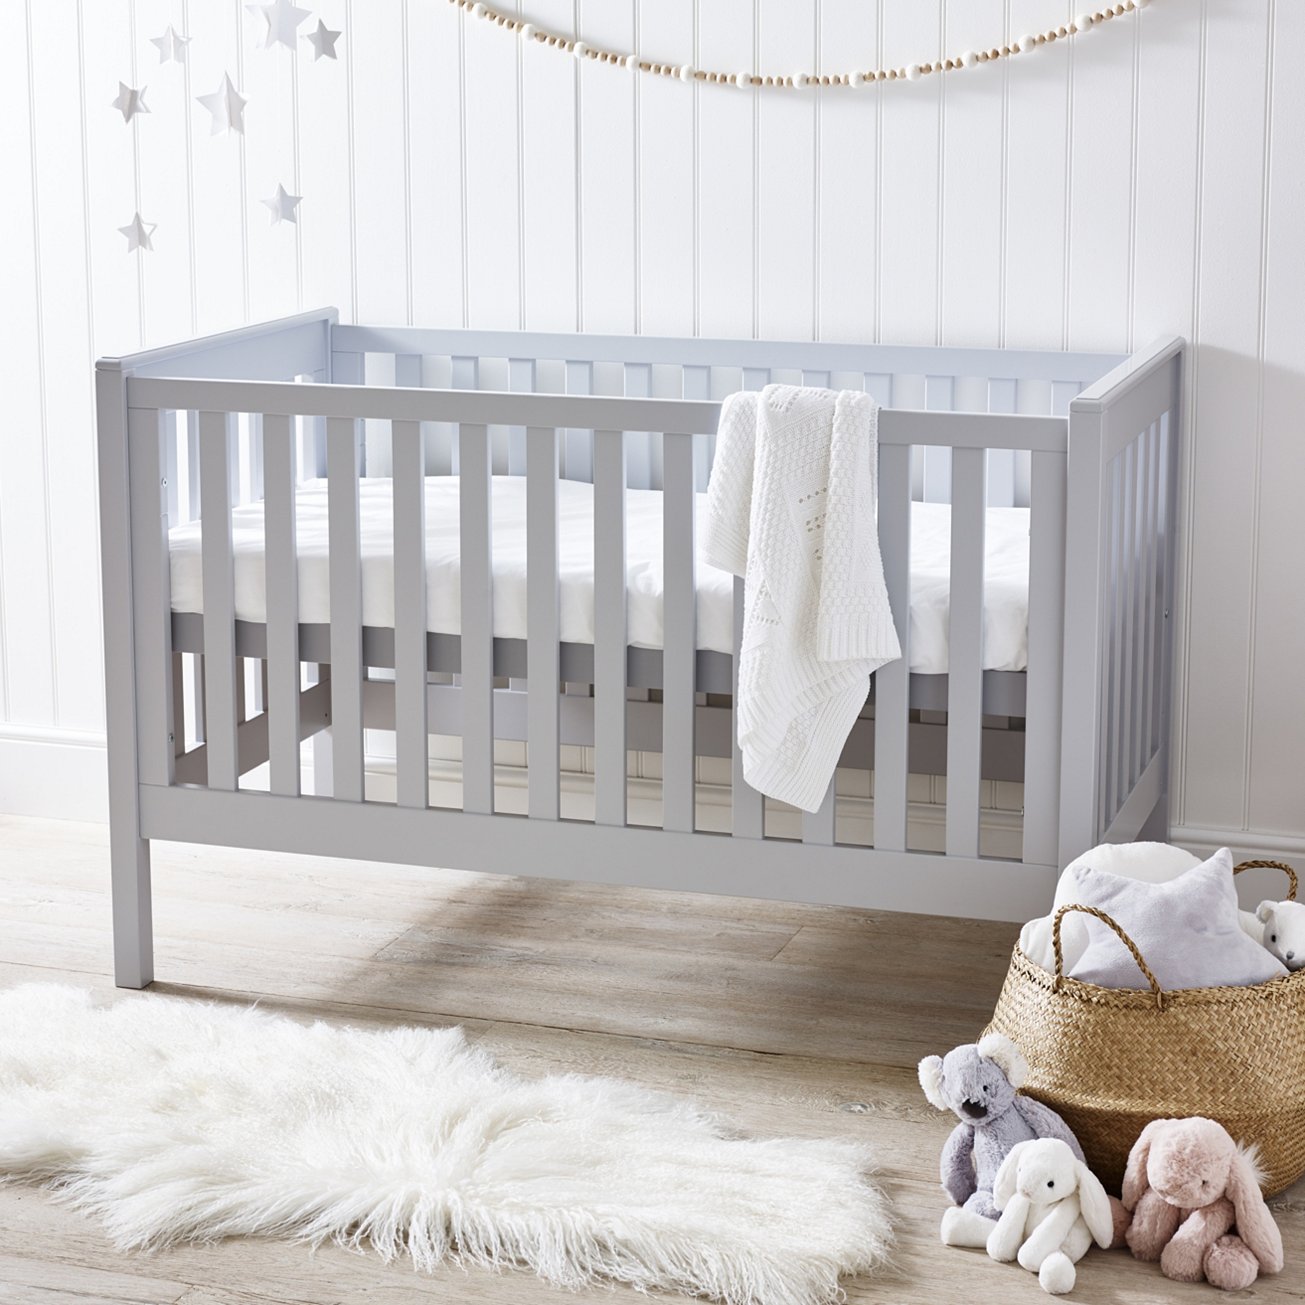 The rich birch bed is THE only early years bed that you will need. When you baby is small the cot will house them with ease. As they start to get older the cot can then be converted into a junior bed and the mattress can be lowered. This means that you do not need to fork out on another bed in their first few years. - £425.00